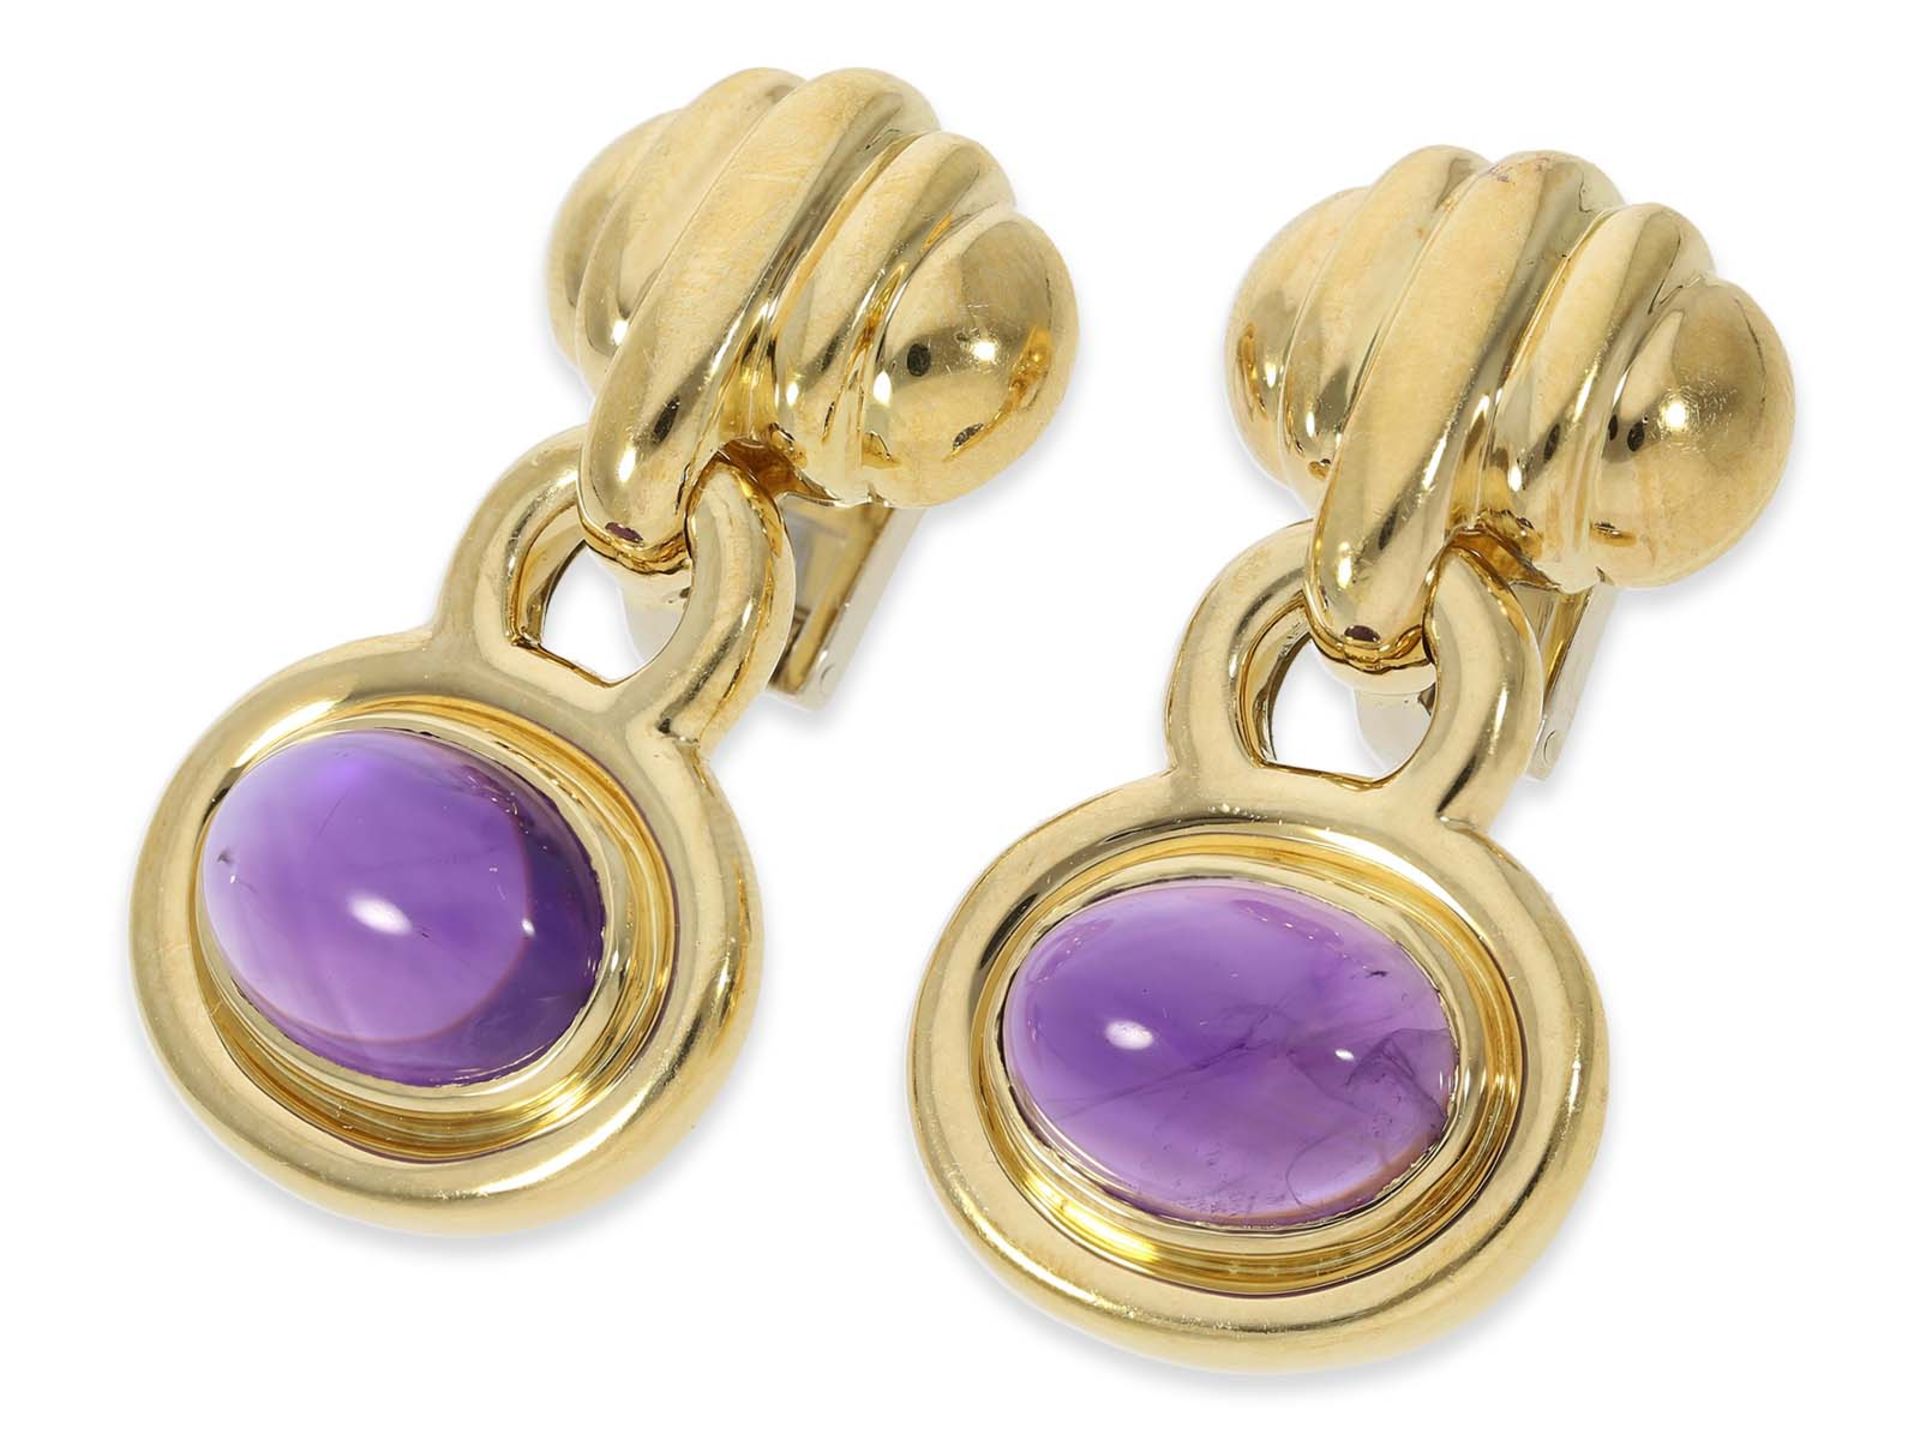 Earrings: high quality handmade ear clips with amethysts, together about 17,2ct, 18K gold